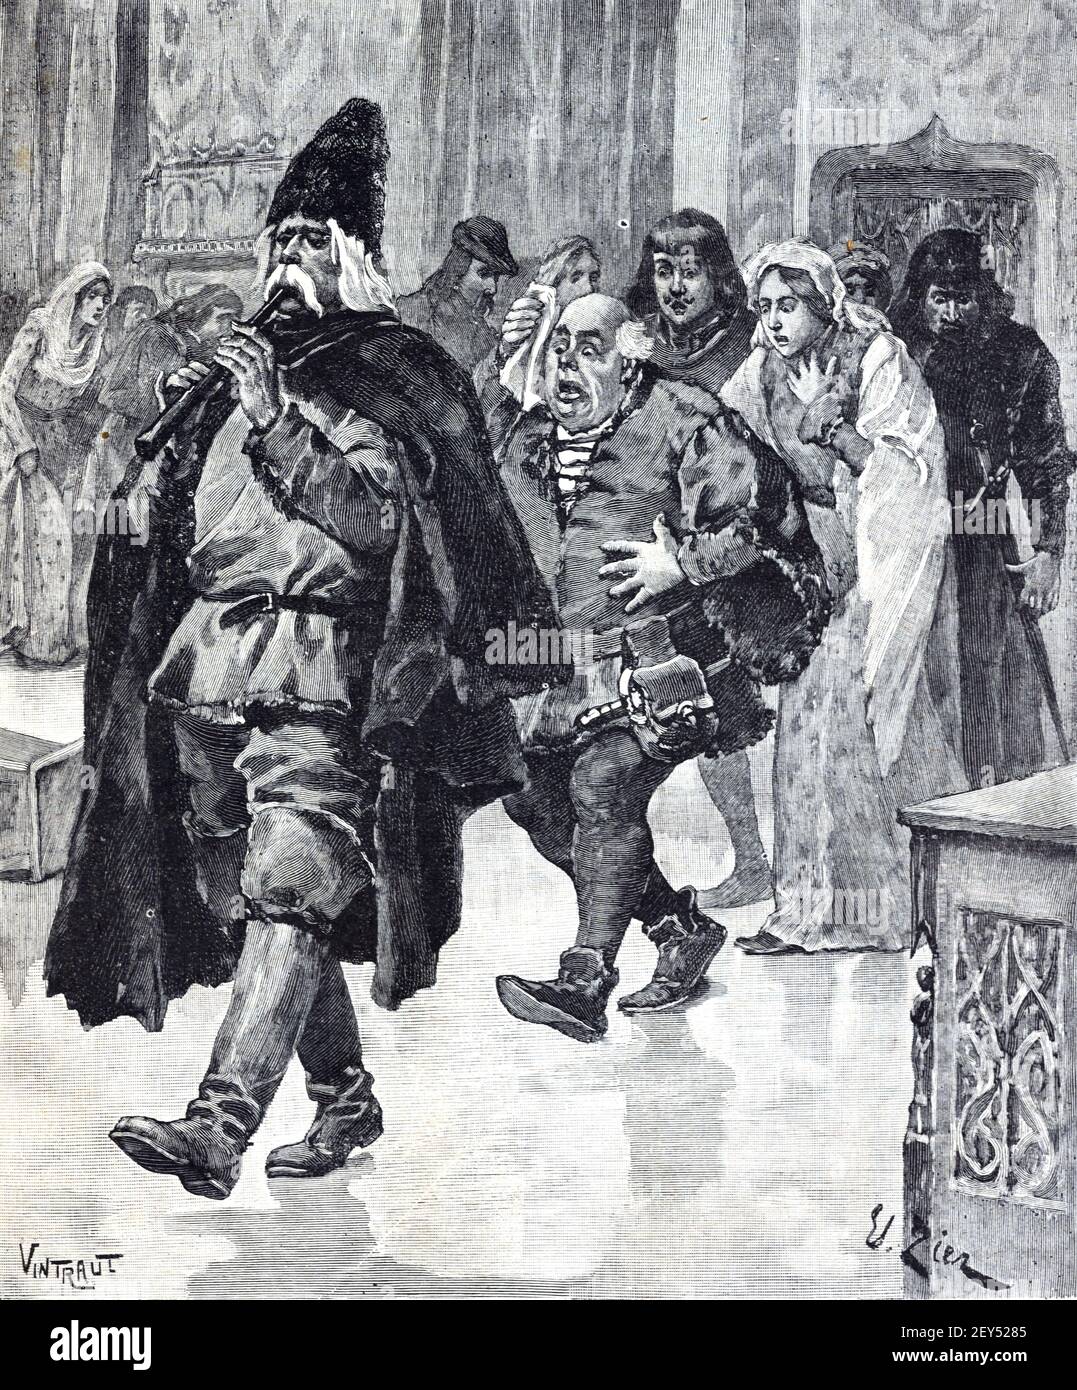 Local Legend based on the Pied Piper of Hamelin of People Following Piper or Flautist as a Parody or Symbol of People or the Population Following a Leader with Blind Admiration or Blind Faith Hanover Germany 1896 Vintage Illustration or Engraving Stock Photo